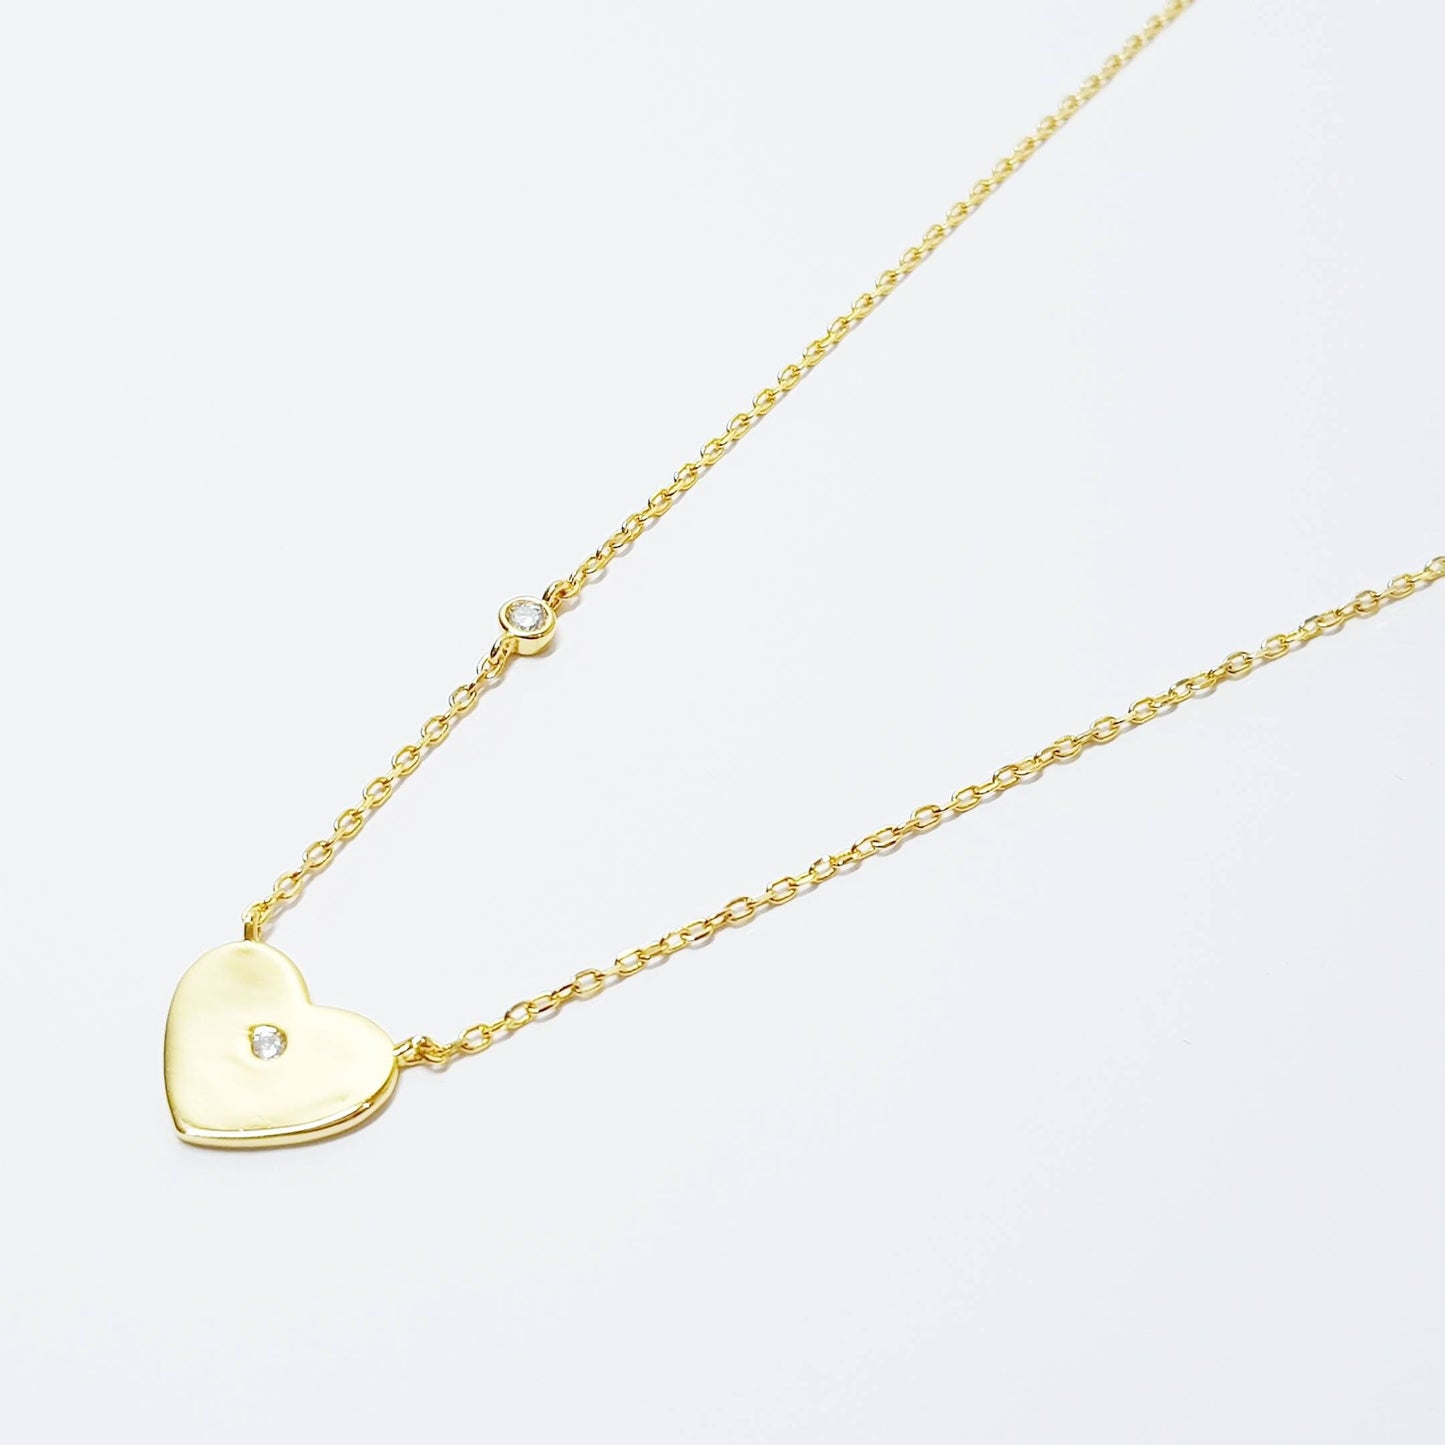 Delicate heart necklace, yellow gold plated love pendant